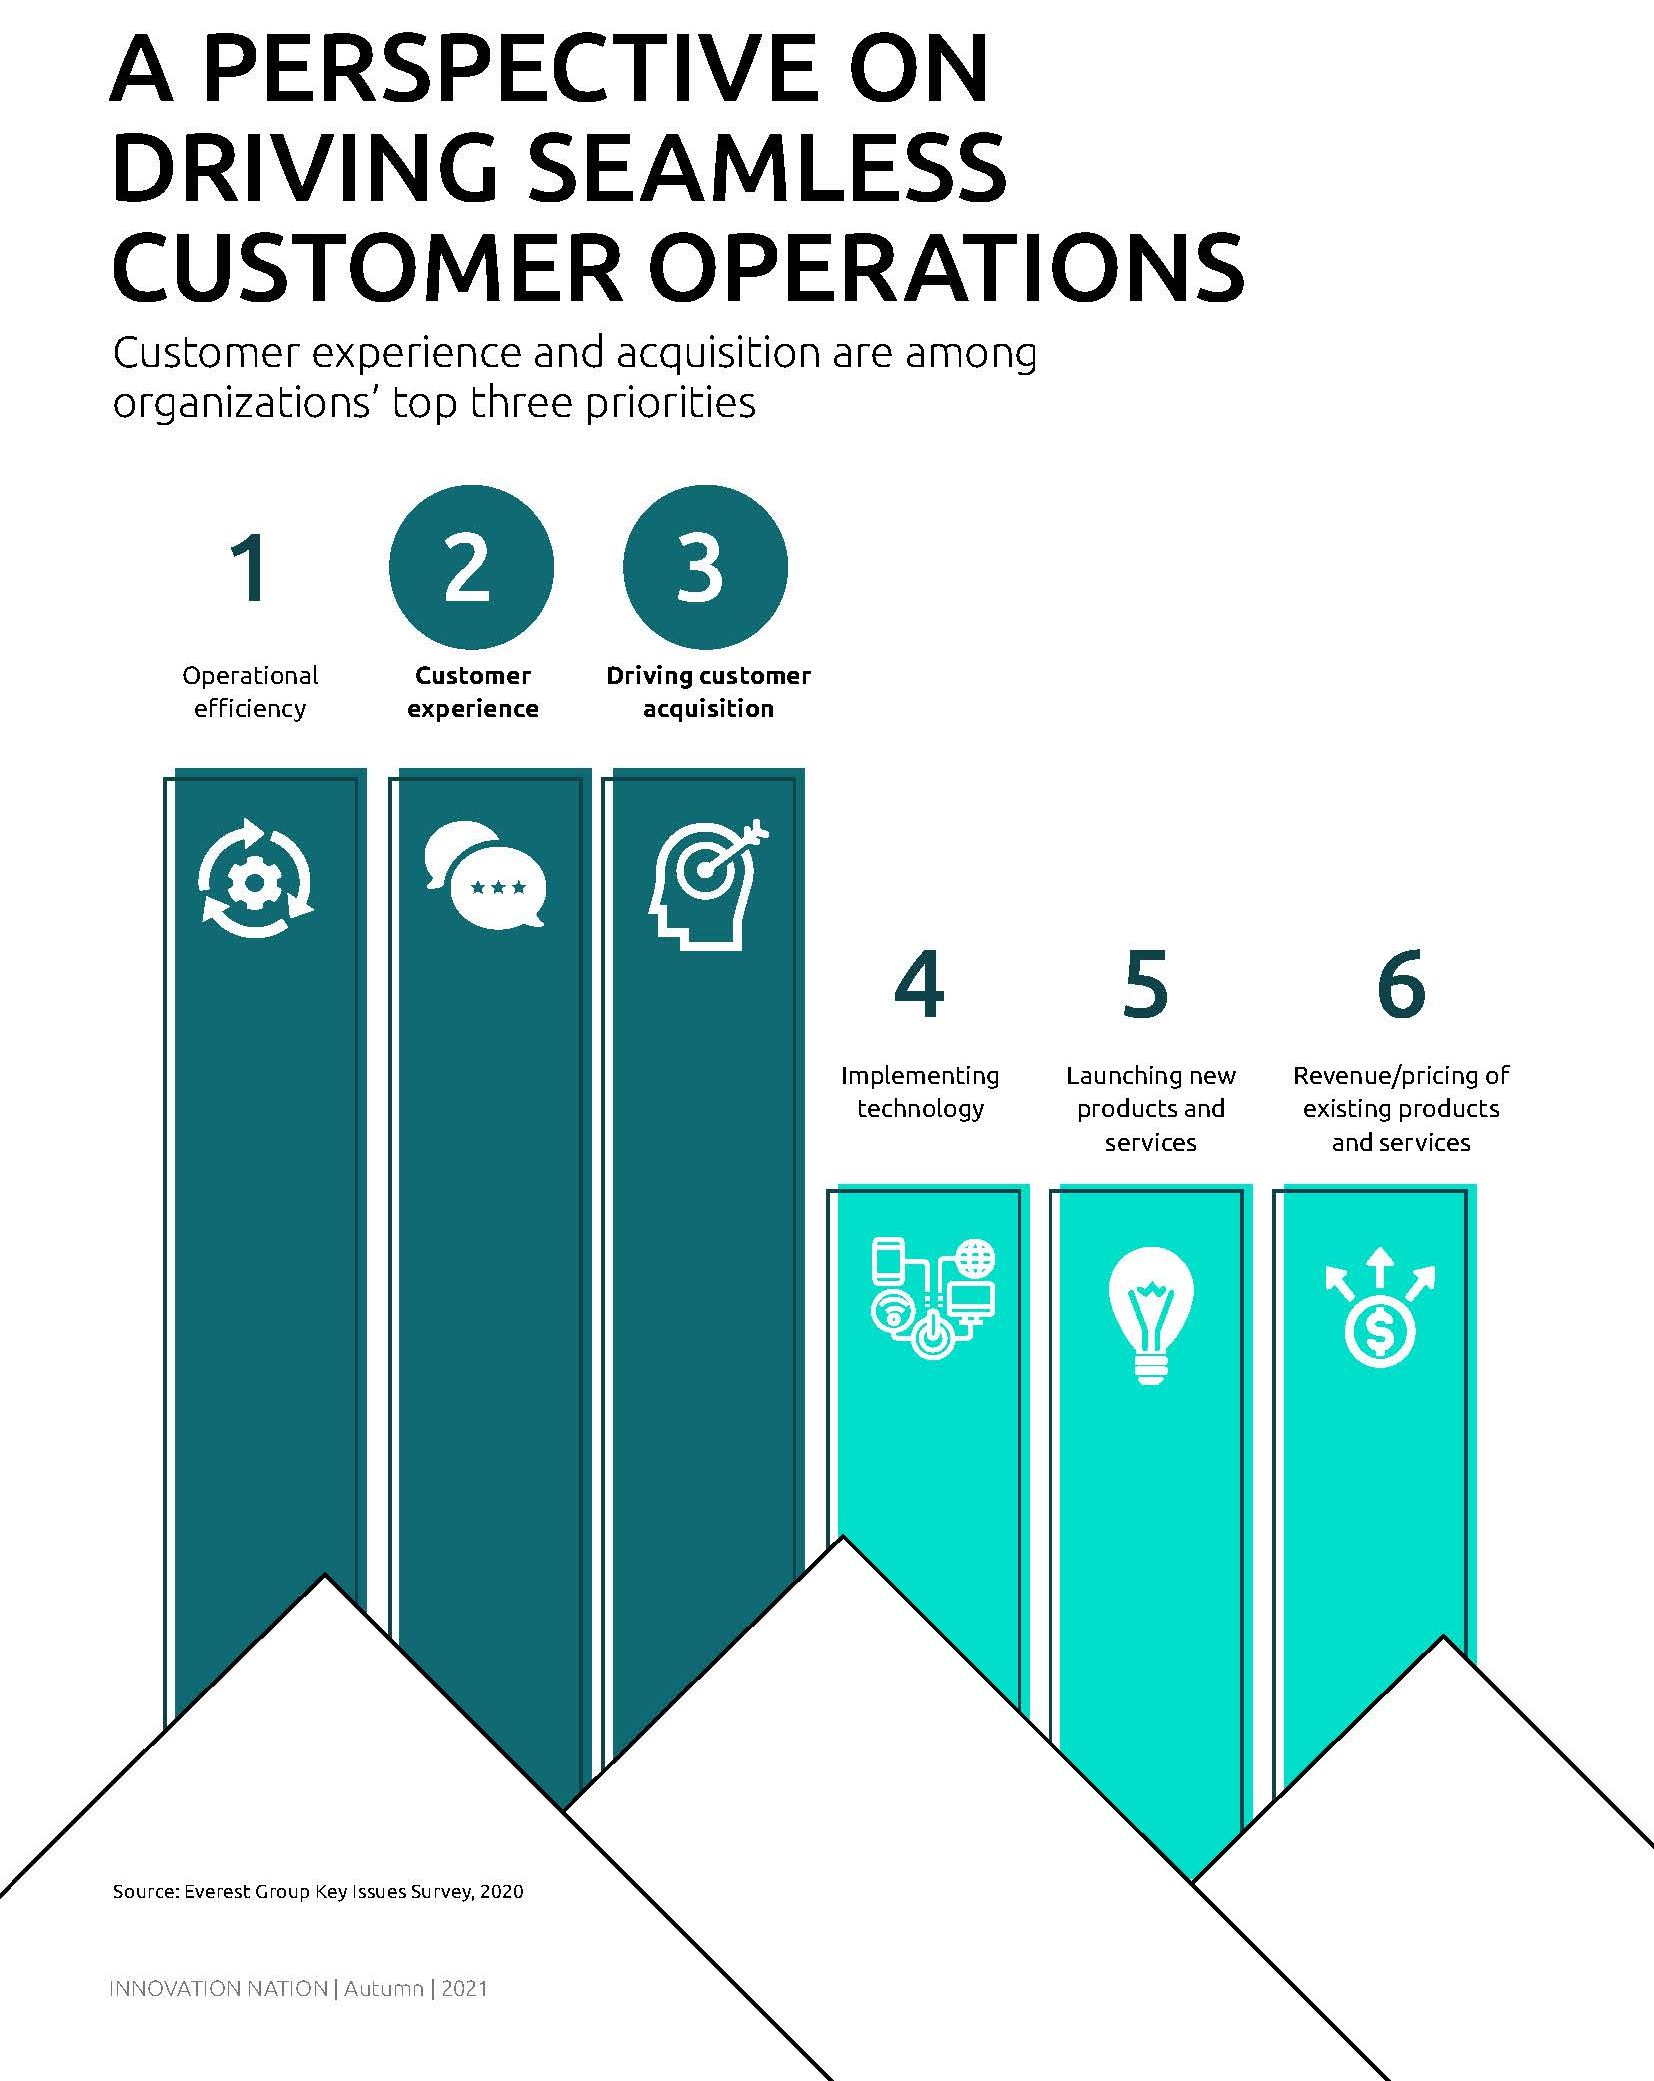 A perspective on seamless customer operations_Page_1